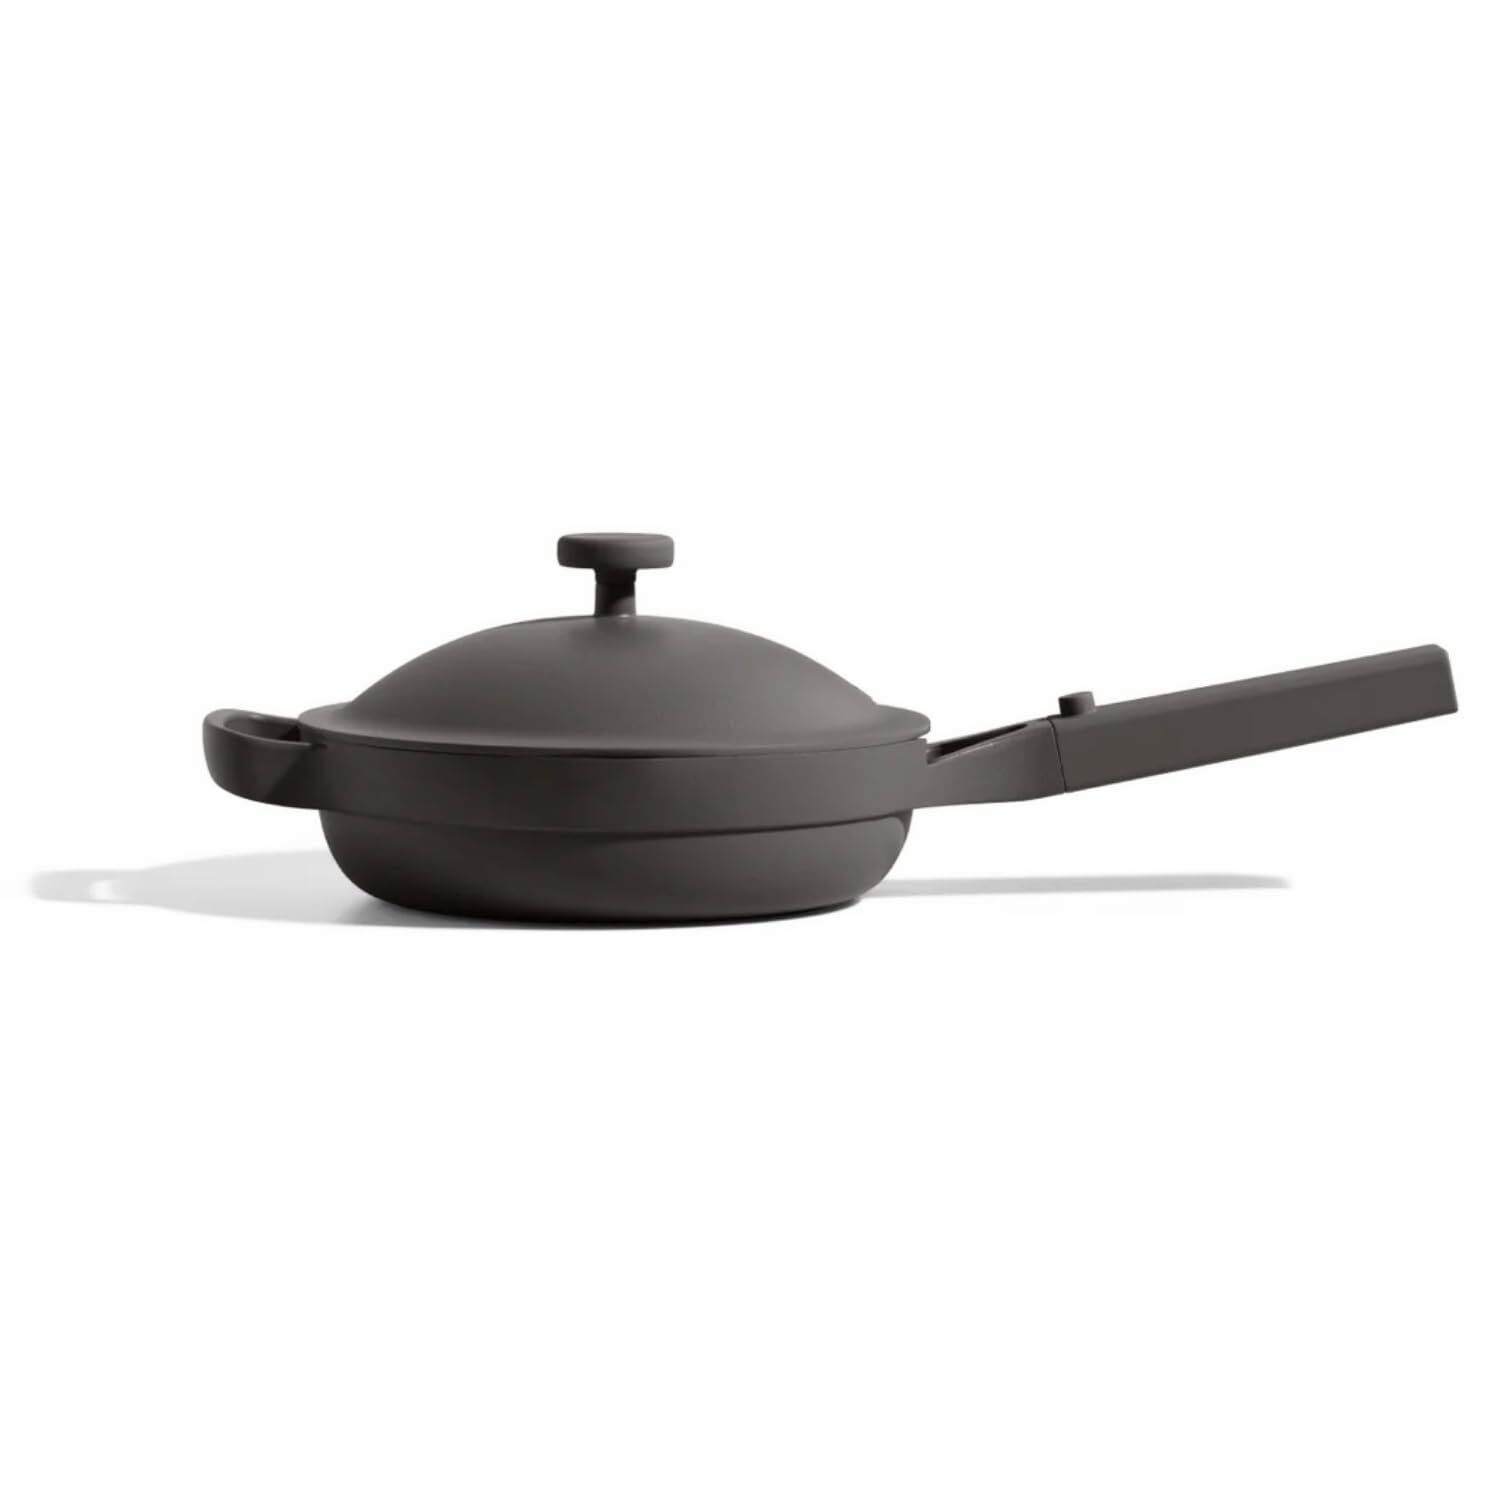 Our Place Always Pan - Mini 8.5 -Inch Nonstick, Toxin-Free Ceramic Cookware